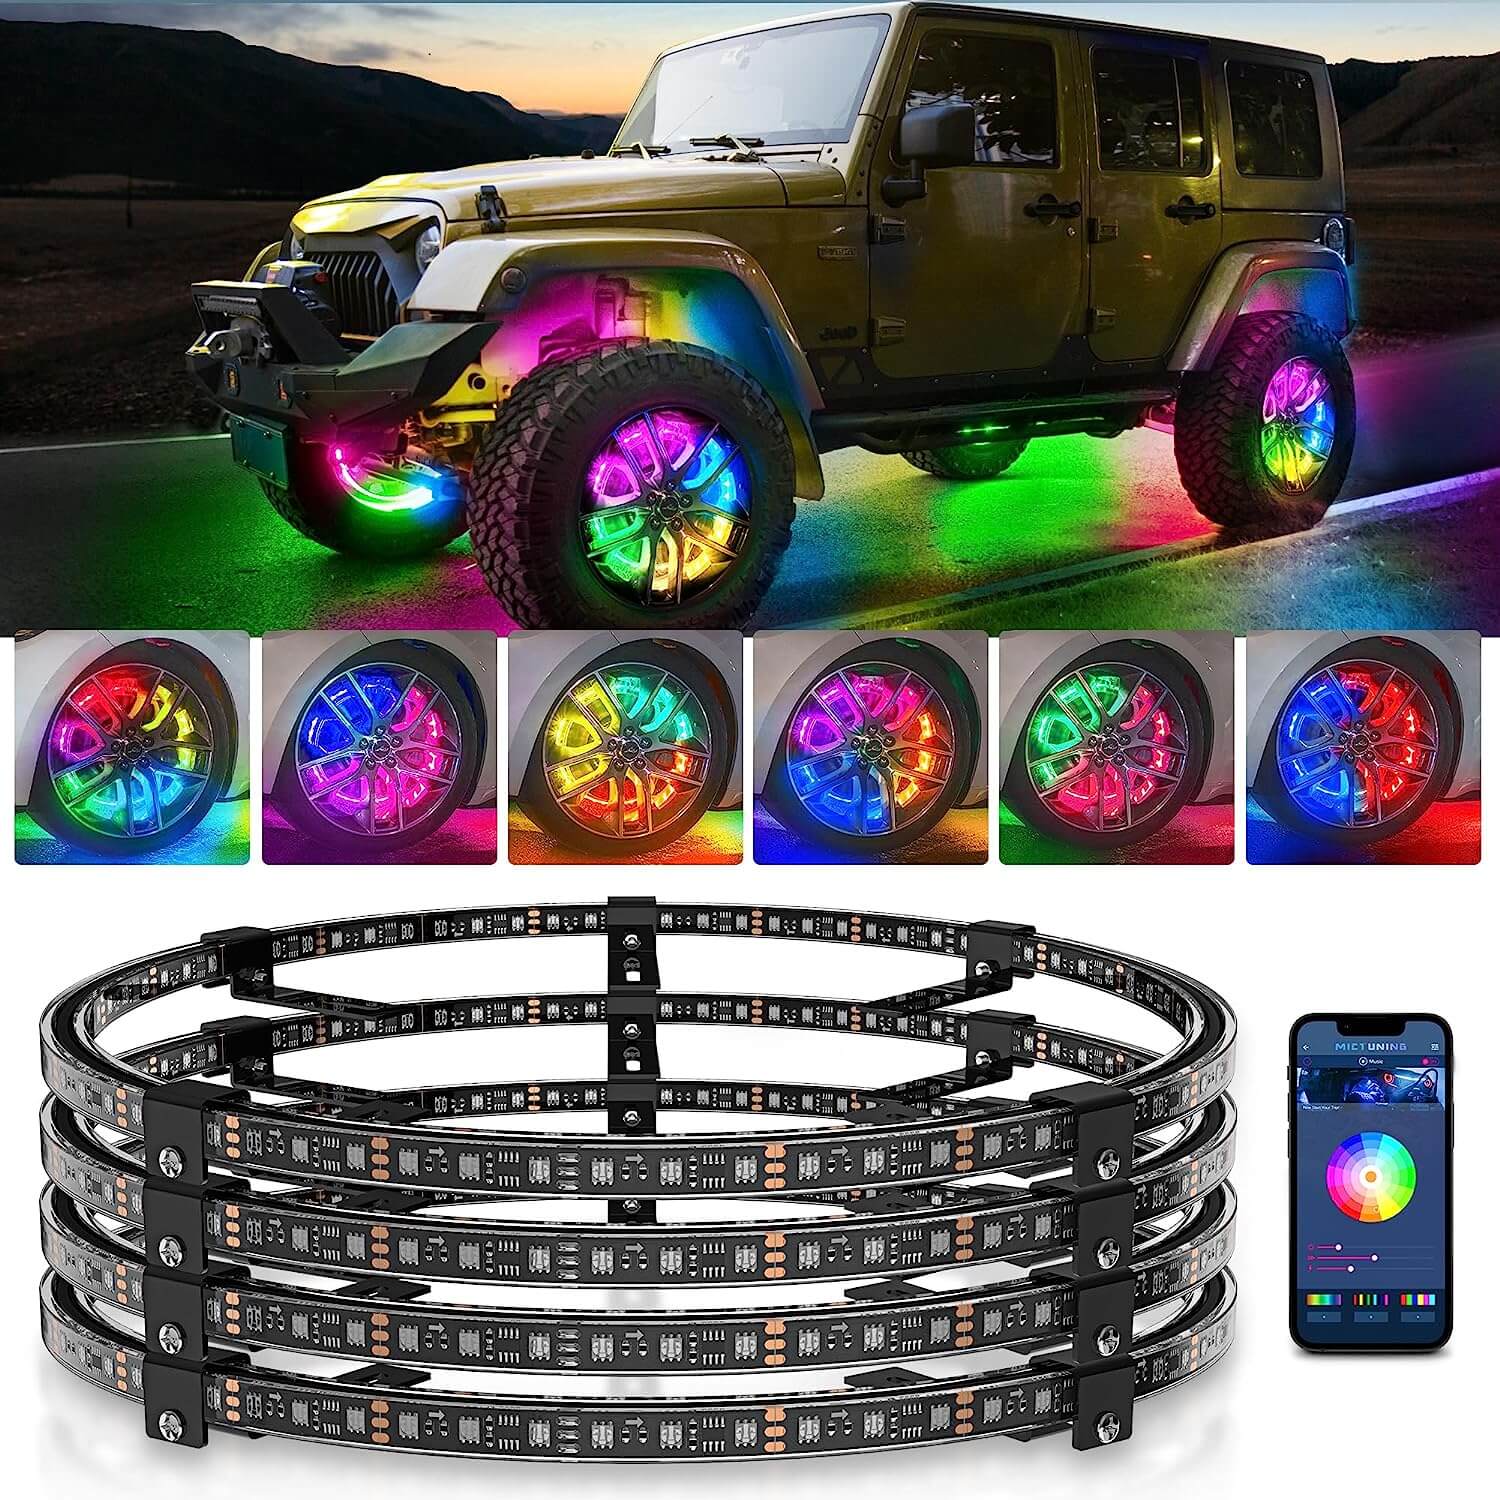 Upgraded 15.5″/17″ V1 RGB + IC Wheel Ring Lights Kit Dream Color, Double-Row Chasing Color Flow Neon Wheel Rim Lights